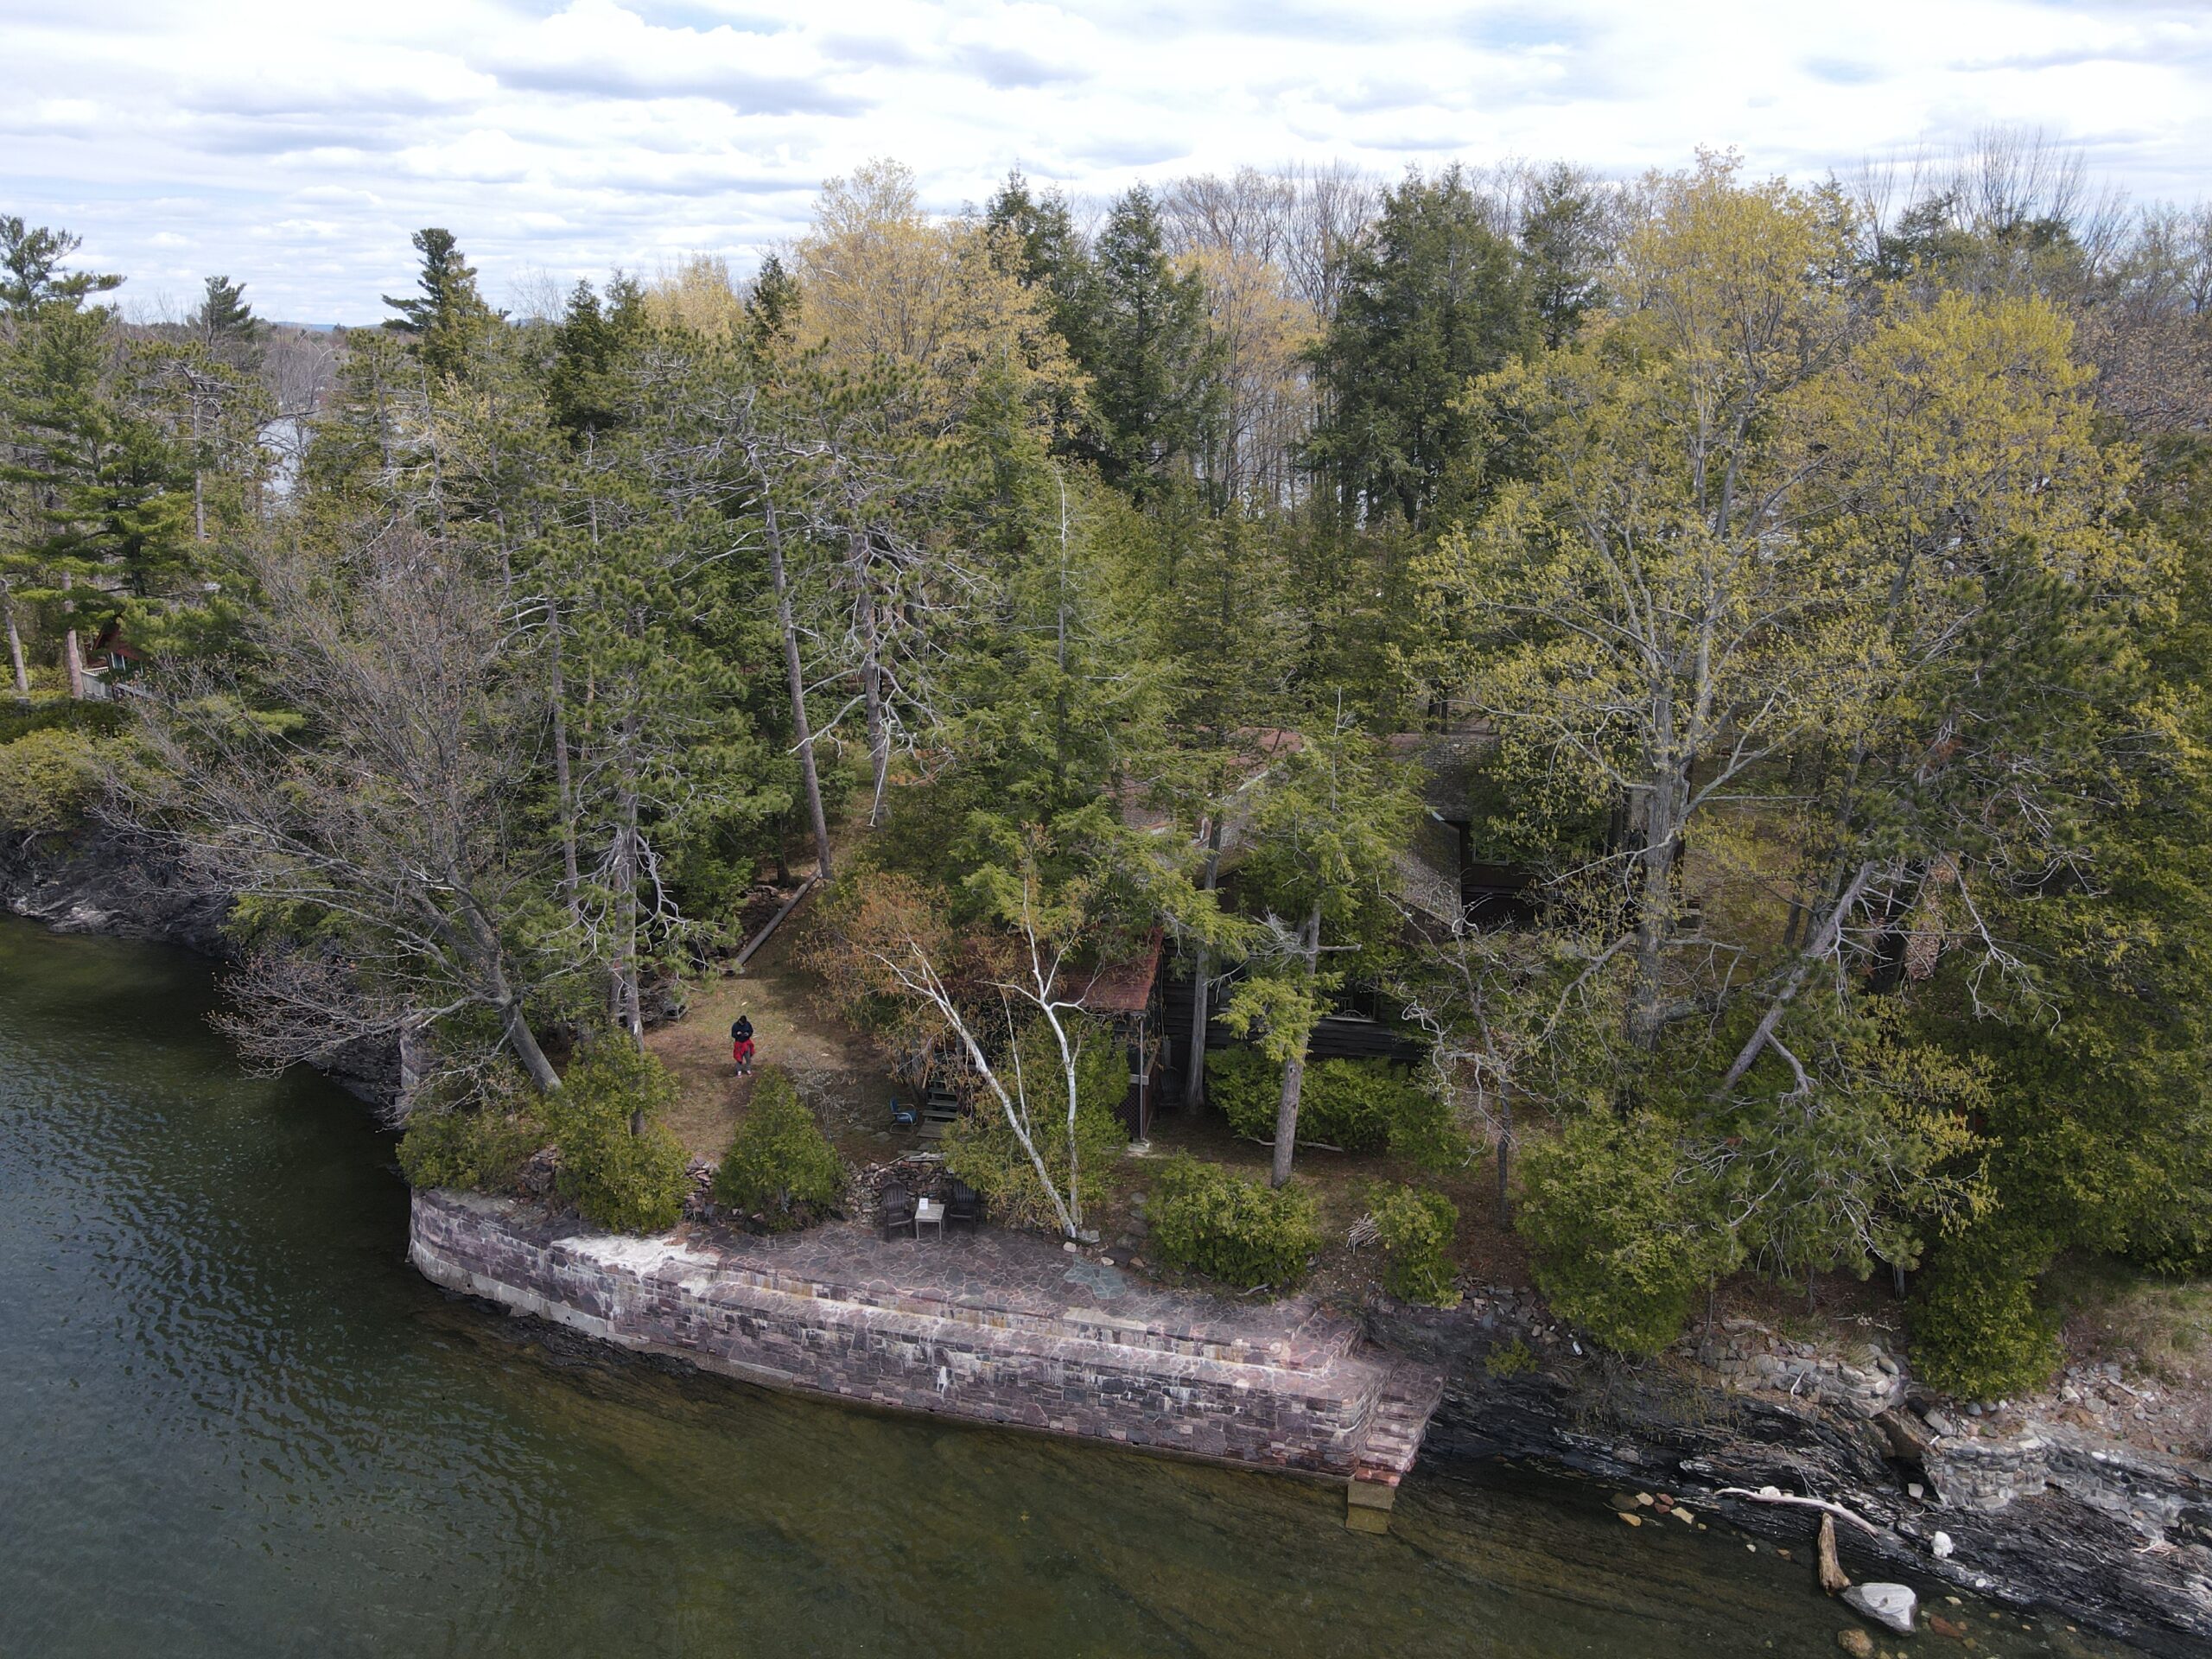 Exterior birds eye view of the dock and property for sale at 506 Appletree Point Road, Burlington, VT.